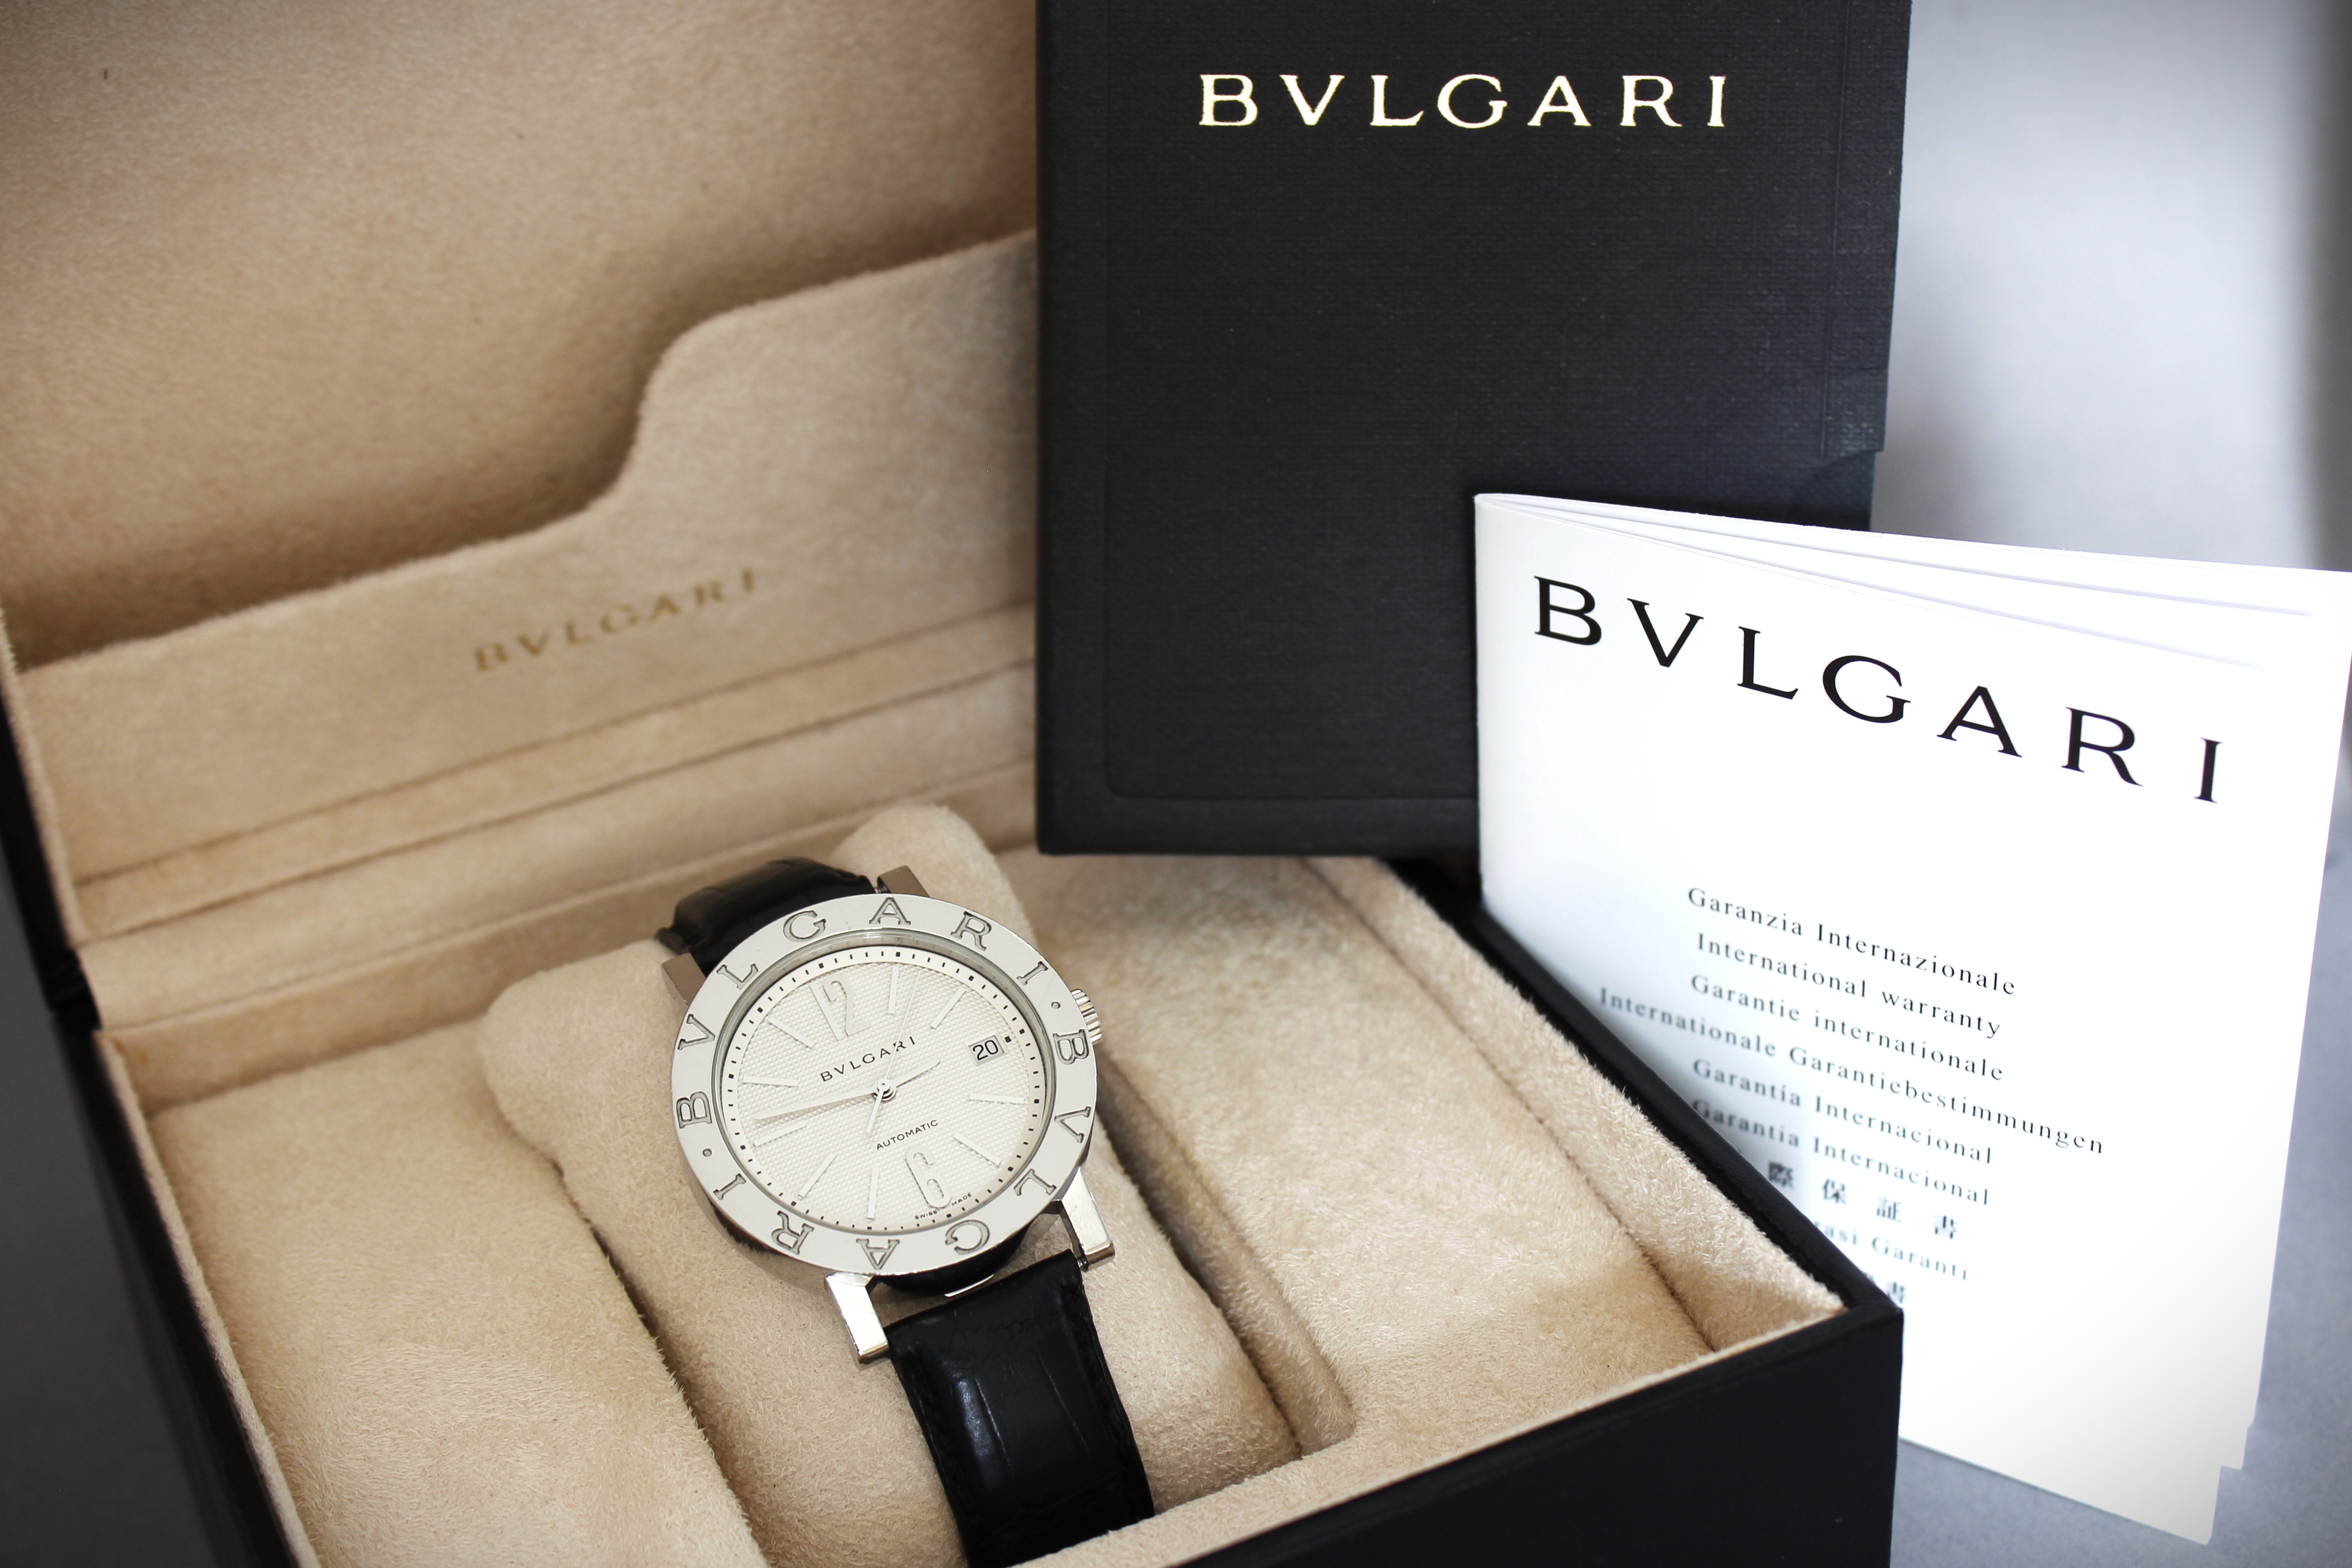 Bulgari Bulgari Date Automatic with Box and Papers 2007 - Image 2 of 5